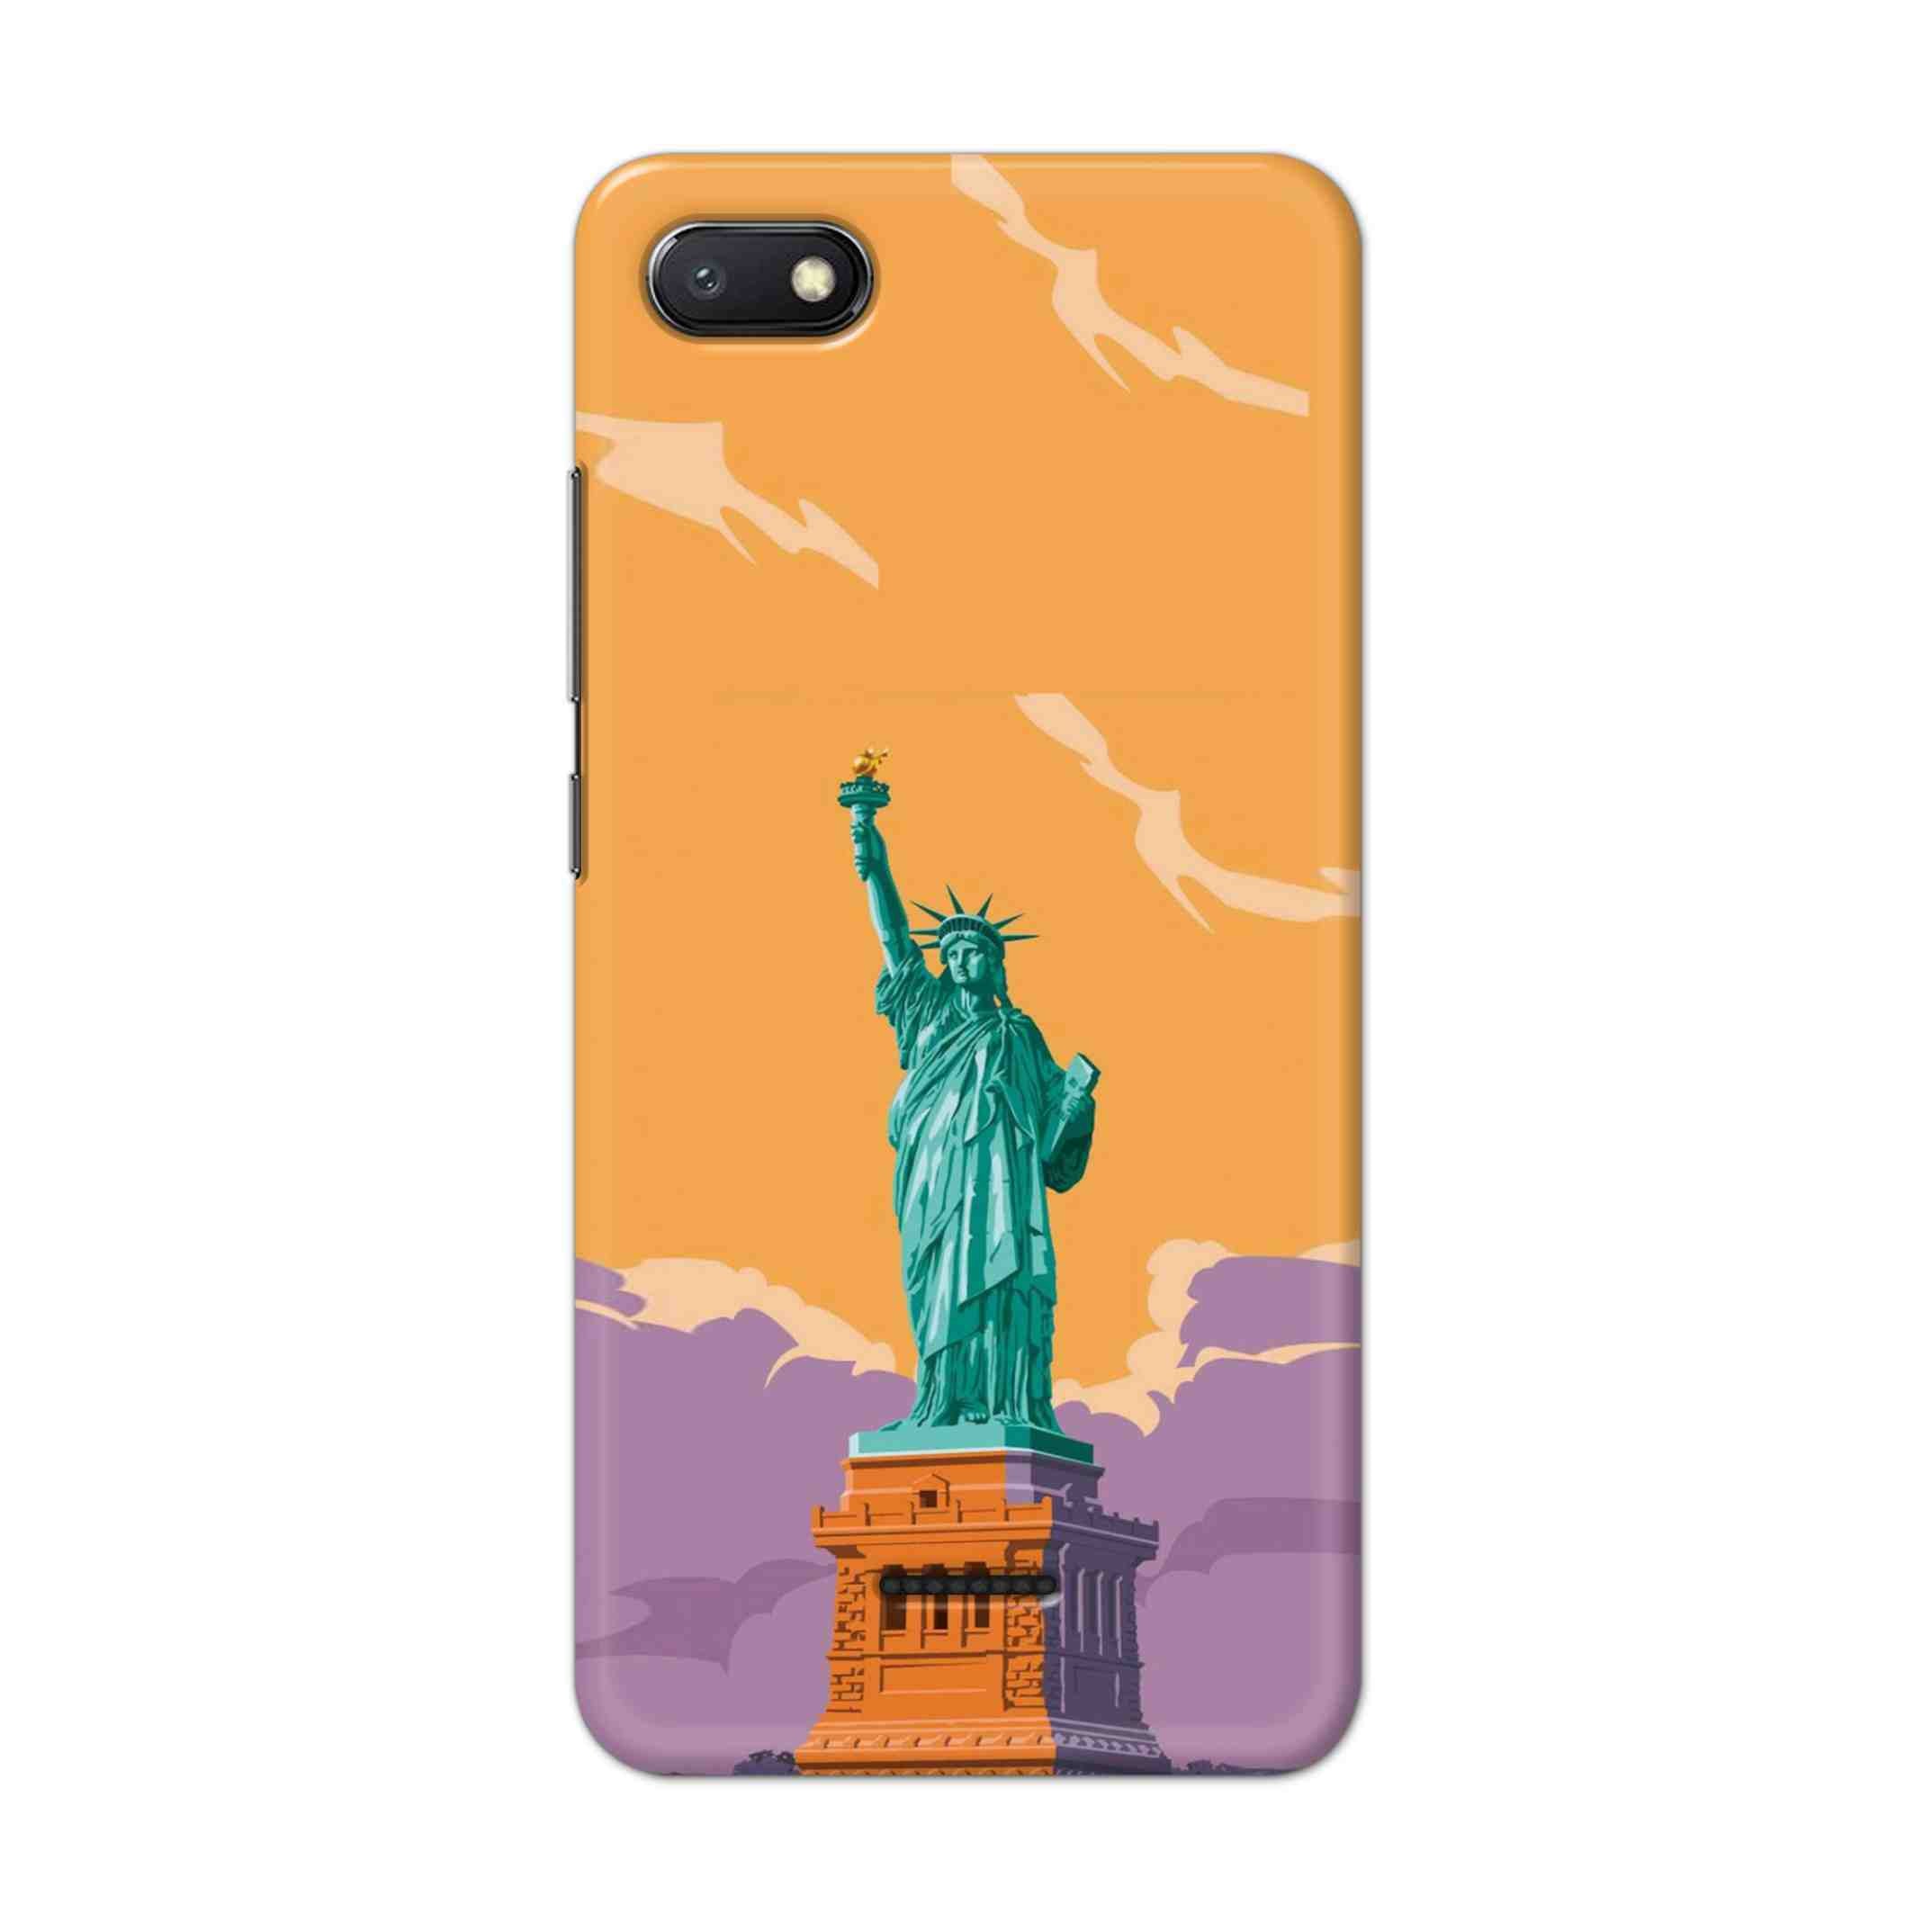 Buy Statue Of Liberty Hard Back Mobile Phone Case/Cover For Xiaomi Redmi 6A Online